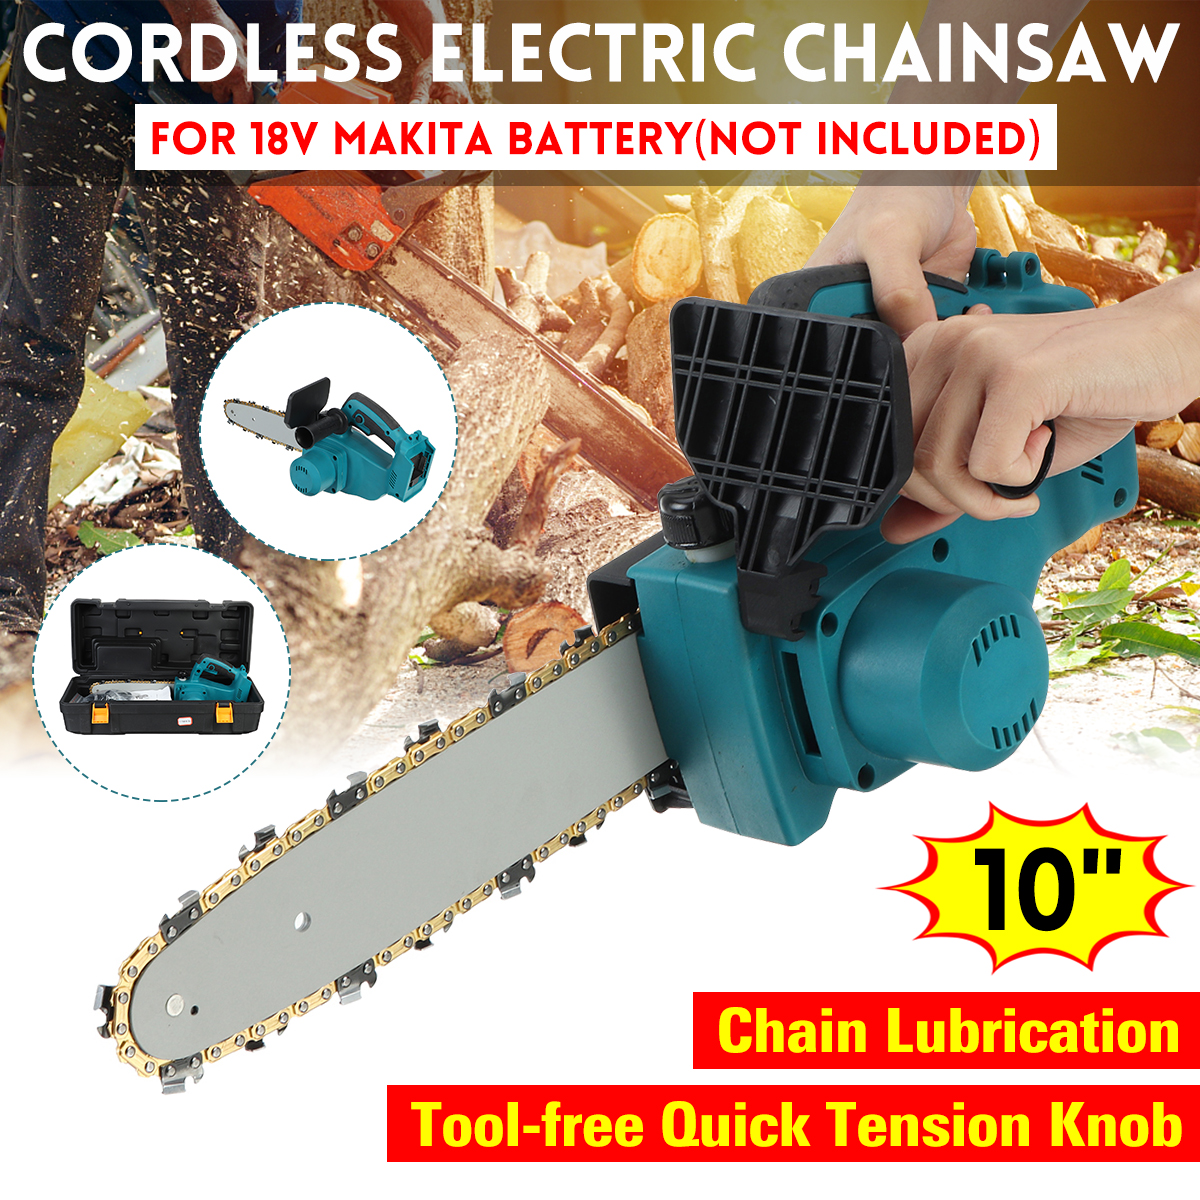 10-Inch-2000W-Brushless-Electric-Saw-Chainsaw-Garden-Woodworking-Wood-Cutters-Fit-Makita-18V-Battery-1890013-3